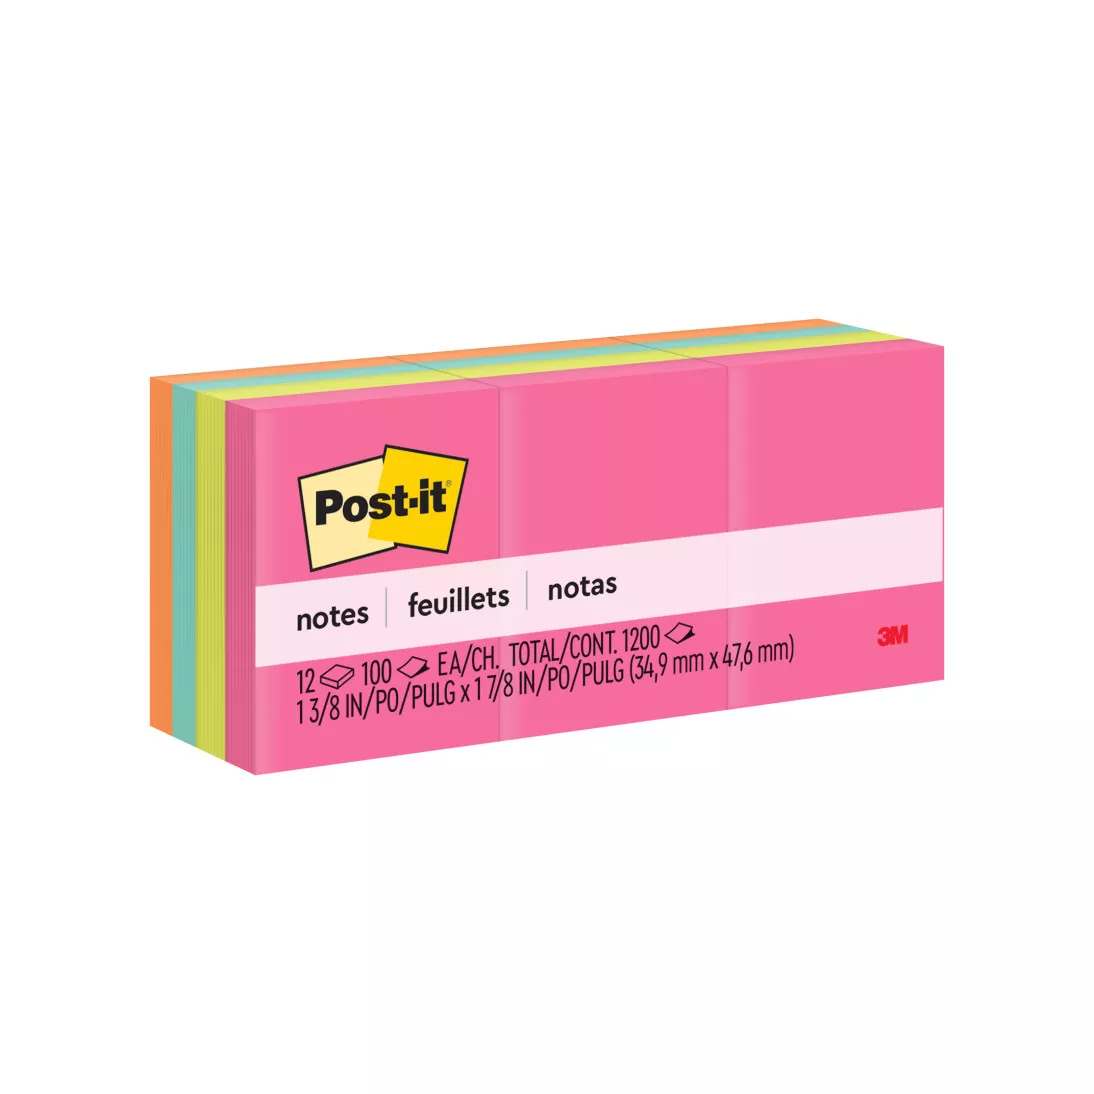 Post-it® Notes 653AN, 1 3/8 in x 1 7/8 in (34,9 mm x 47,6 mm) Cape Town
Collection